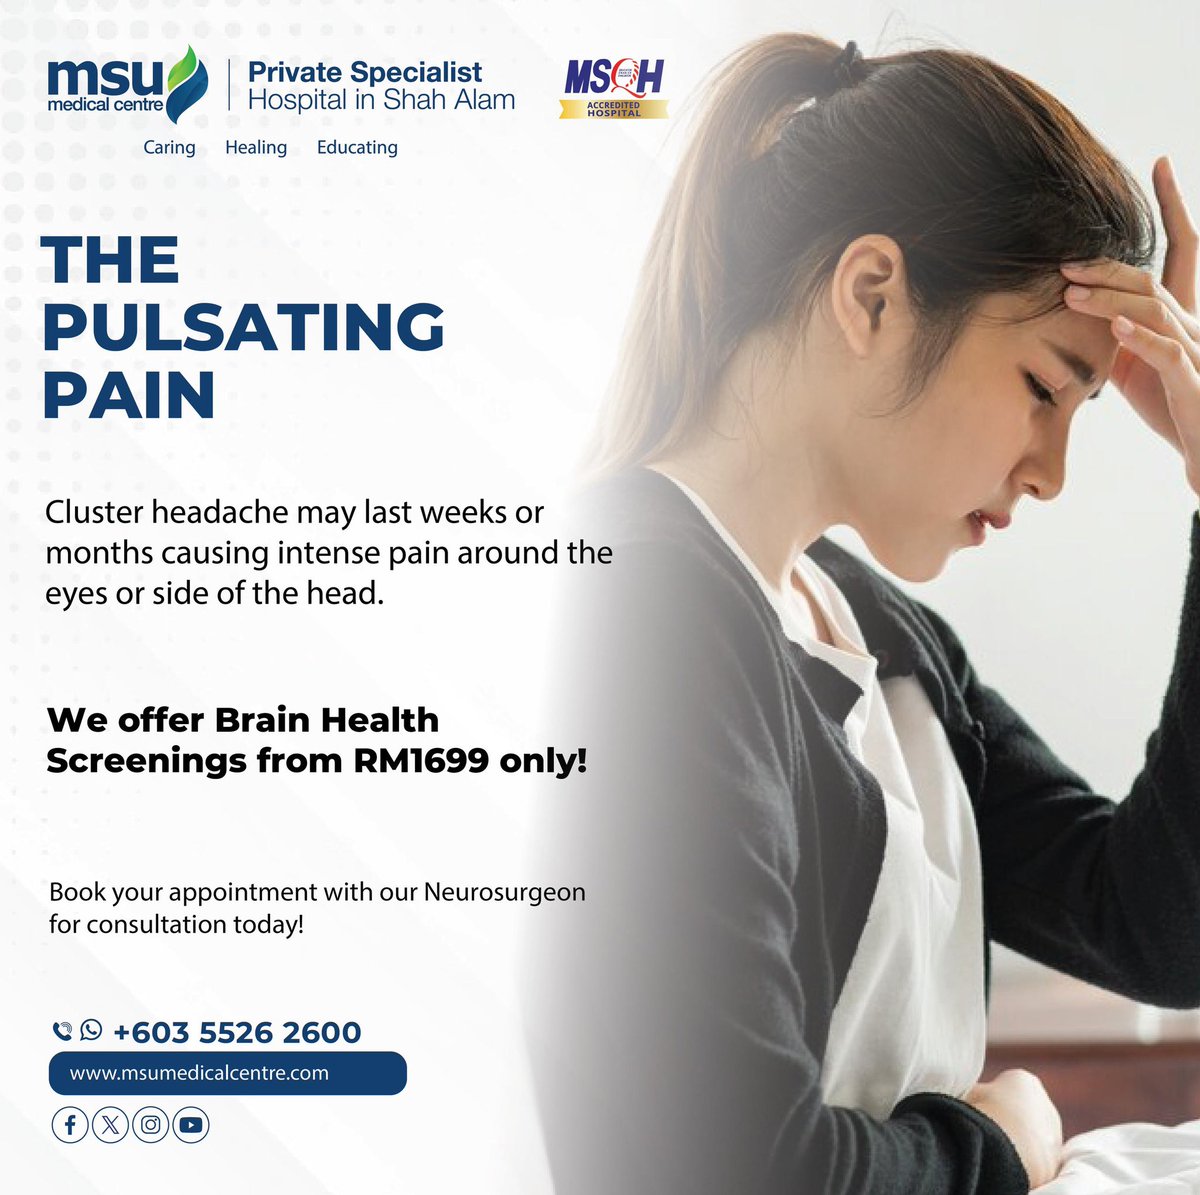 Headaches exhibit significant variations in pain location, intensity and frequency. Enroll in our brain health screening now! For additional information, please contact us at 03-55262600 or visit our website at msumedicalcentre.com. #CaringHealingEducating #MSUMC #brain